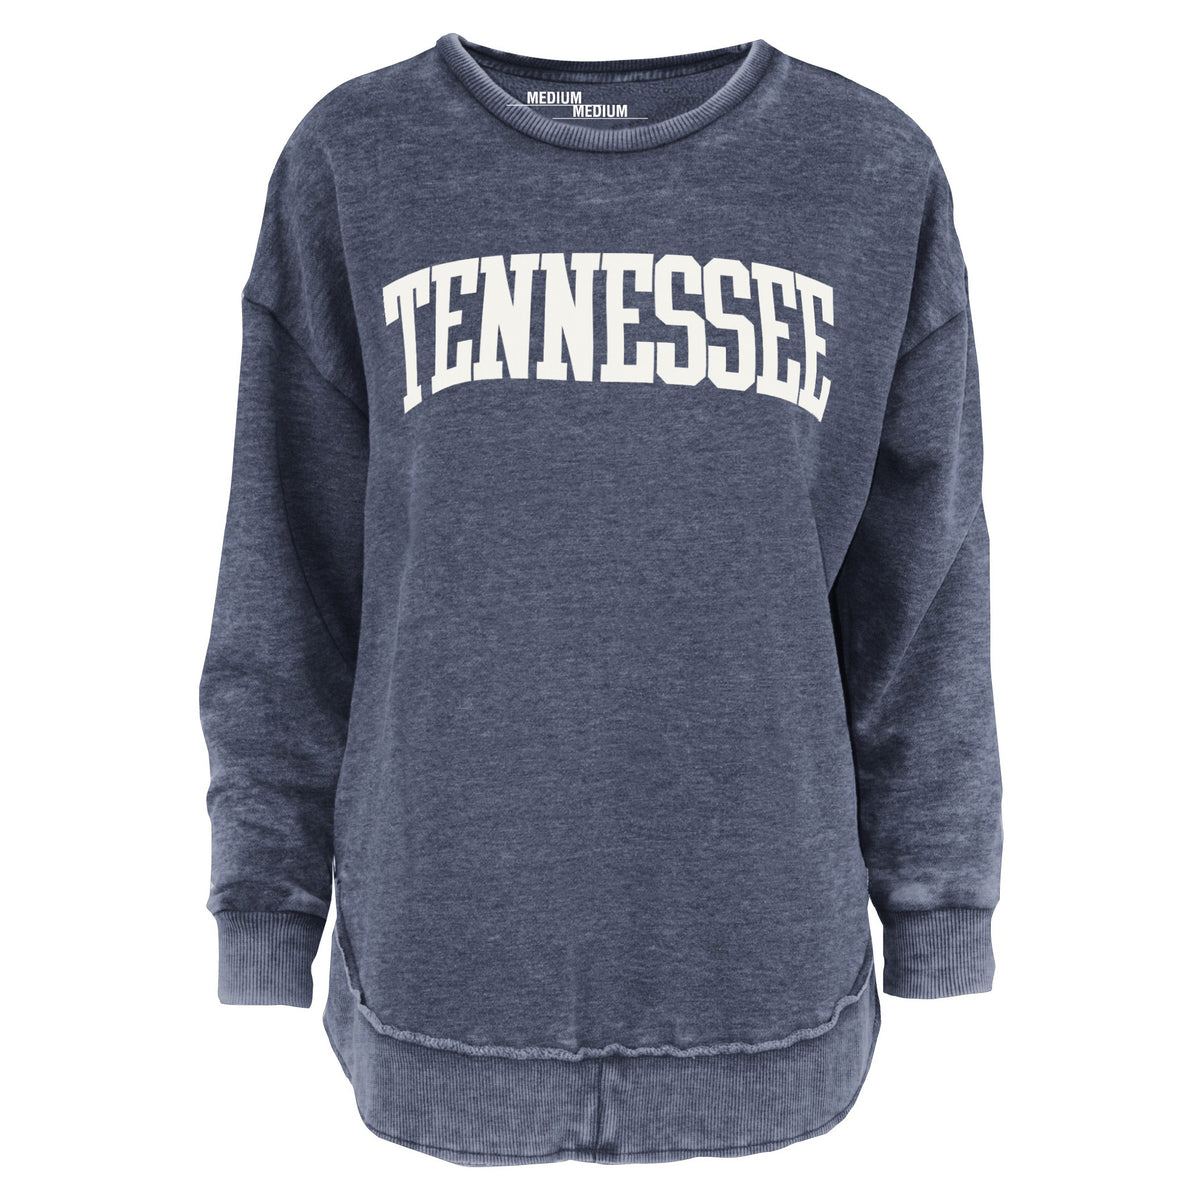 Arch Tennessee Poncho